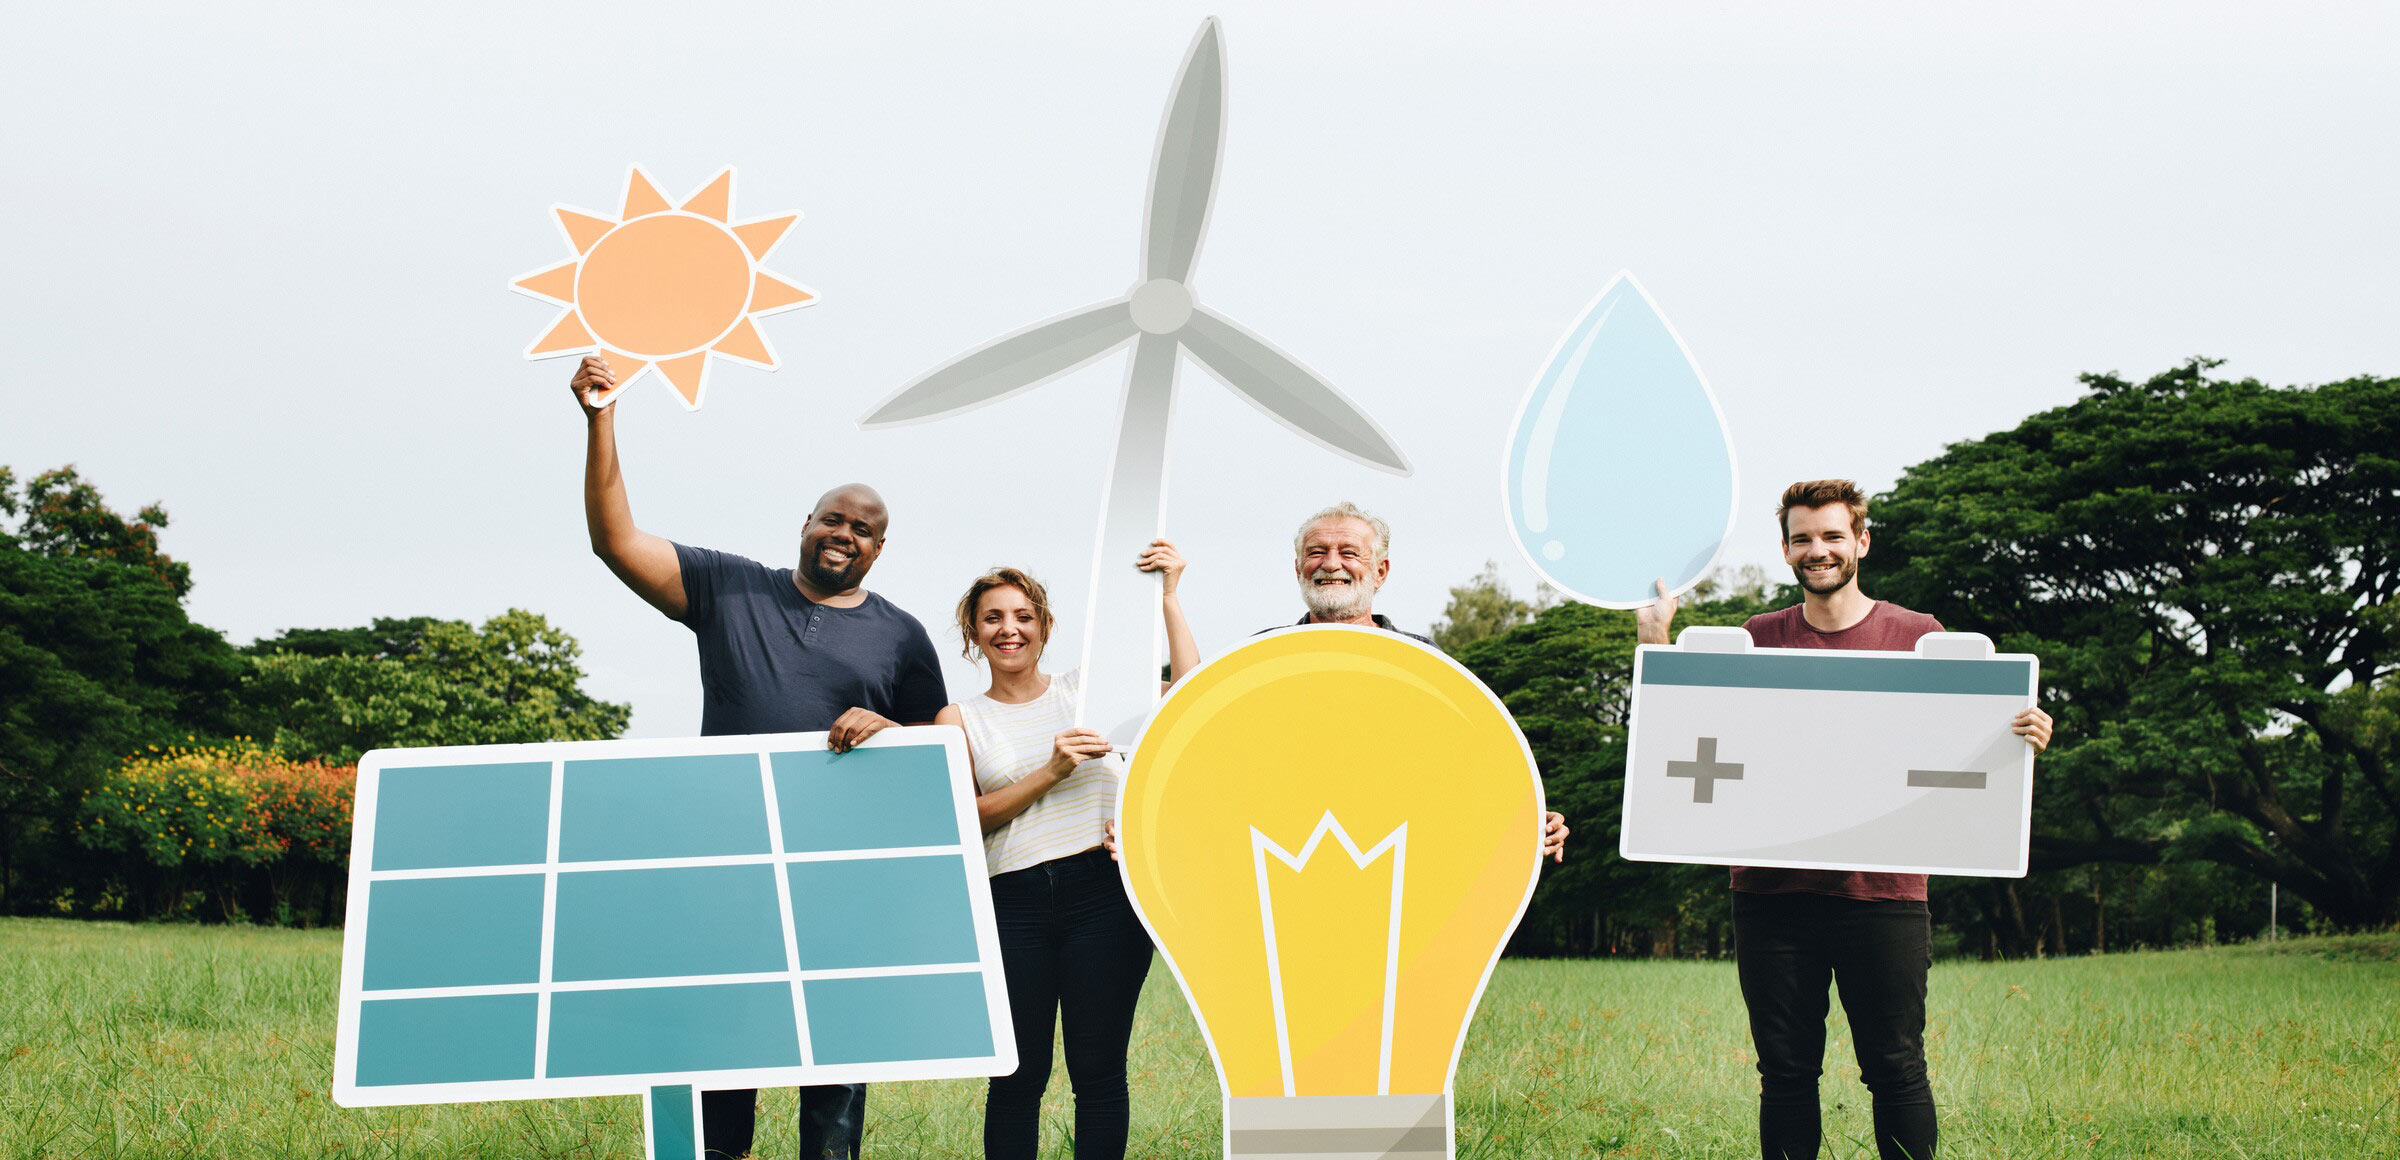 Renewable Energy Communities (RECs): many people, families and businesses under one roof